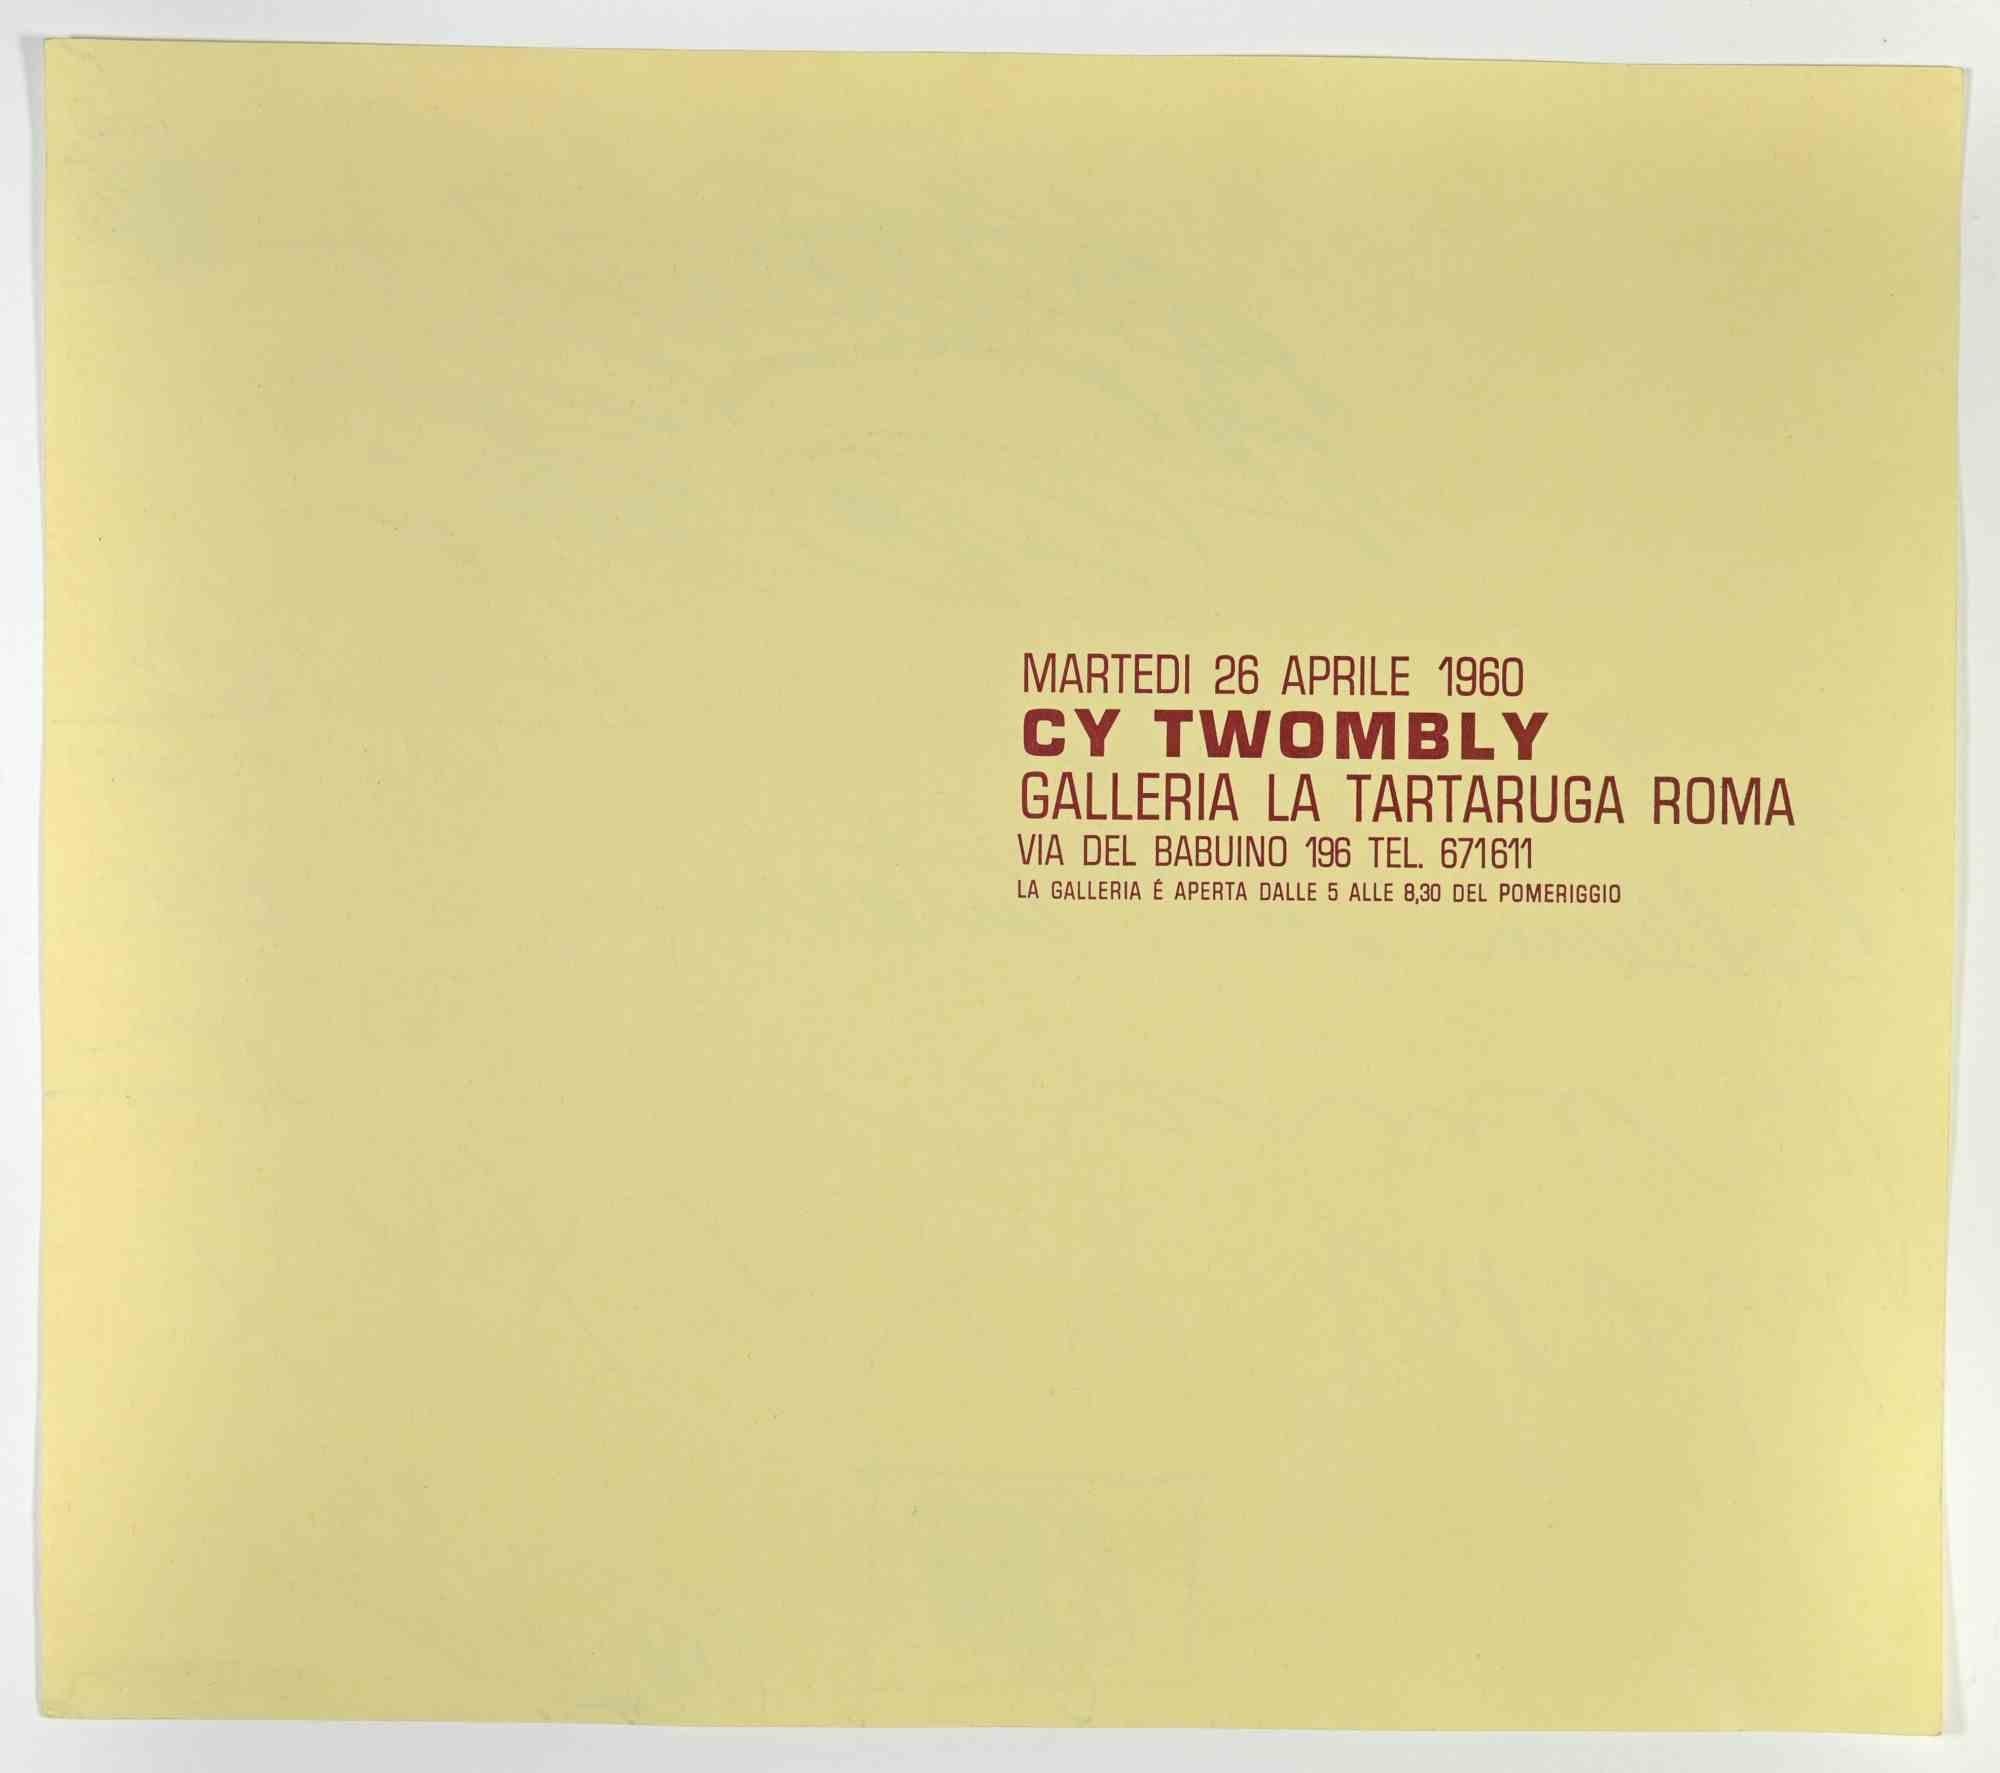 Cy Twombly - Exhibition Galleria La Tartaruga 1960 - Contemporary Art by (after) Cy Twombly